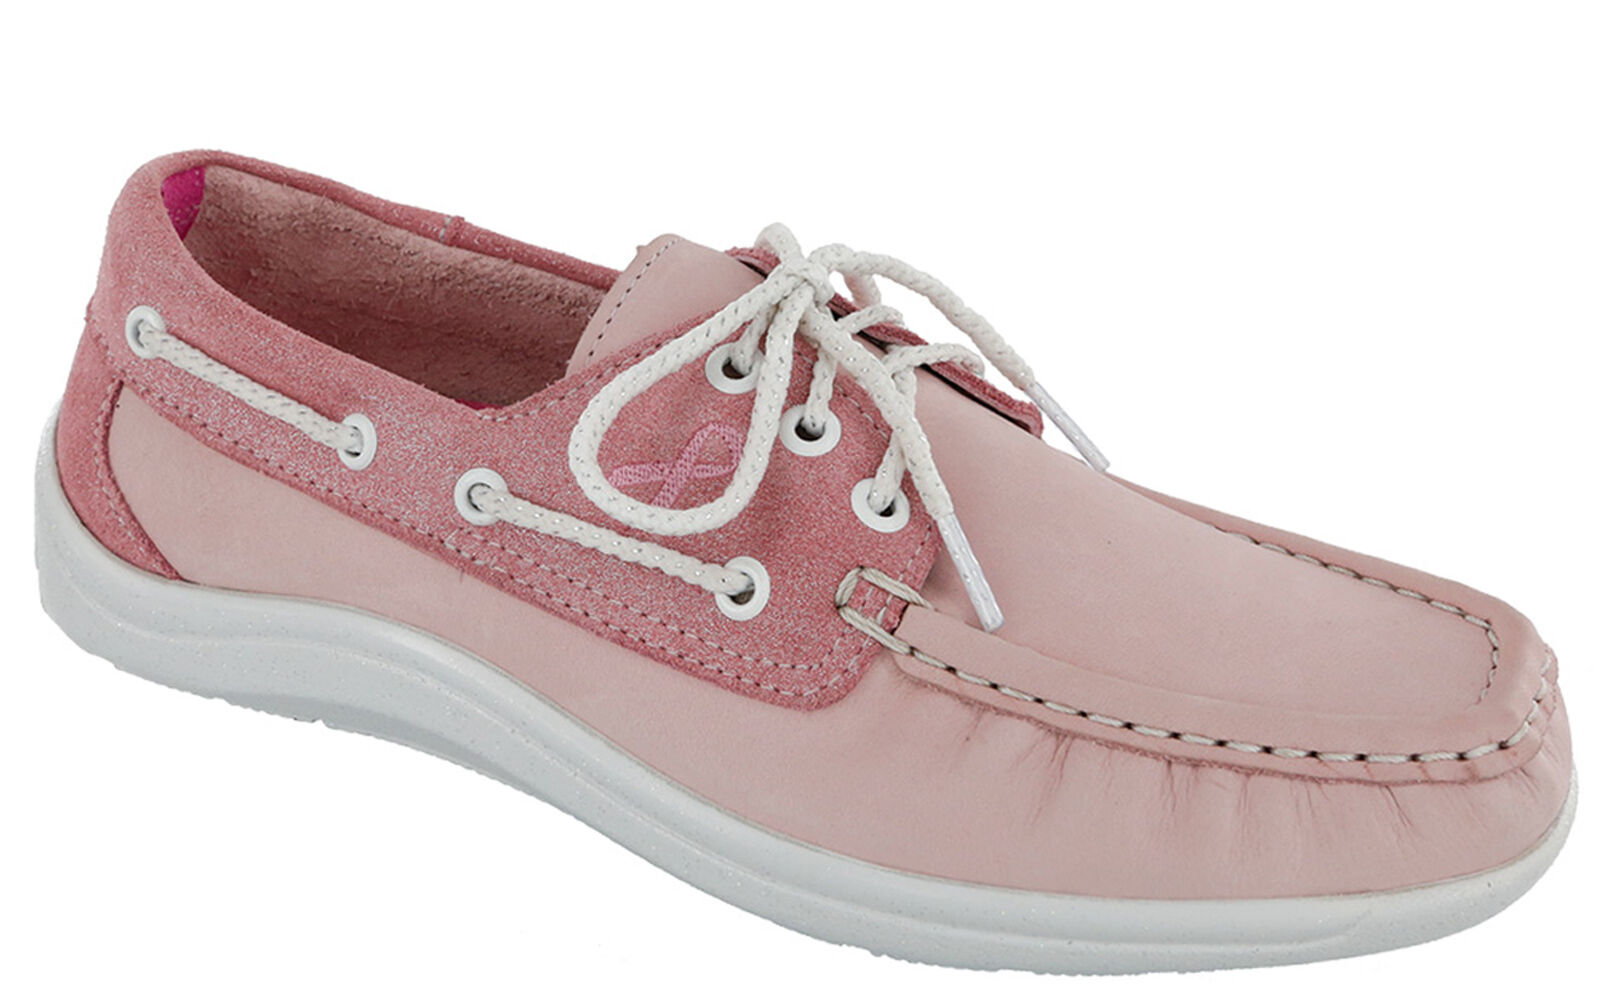 women's orthotic boat shoes